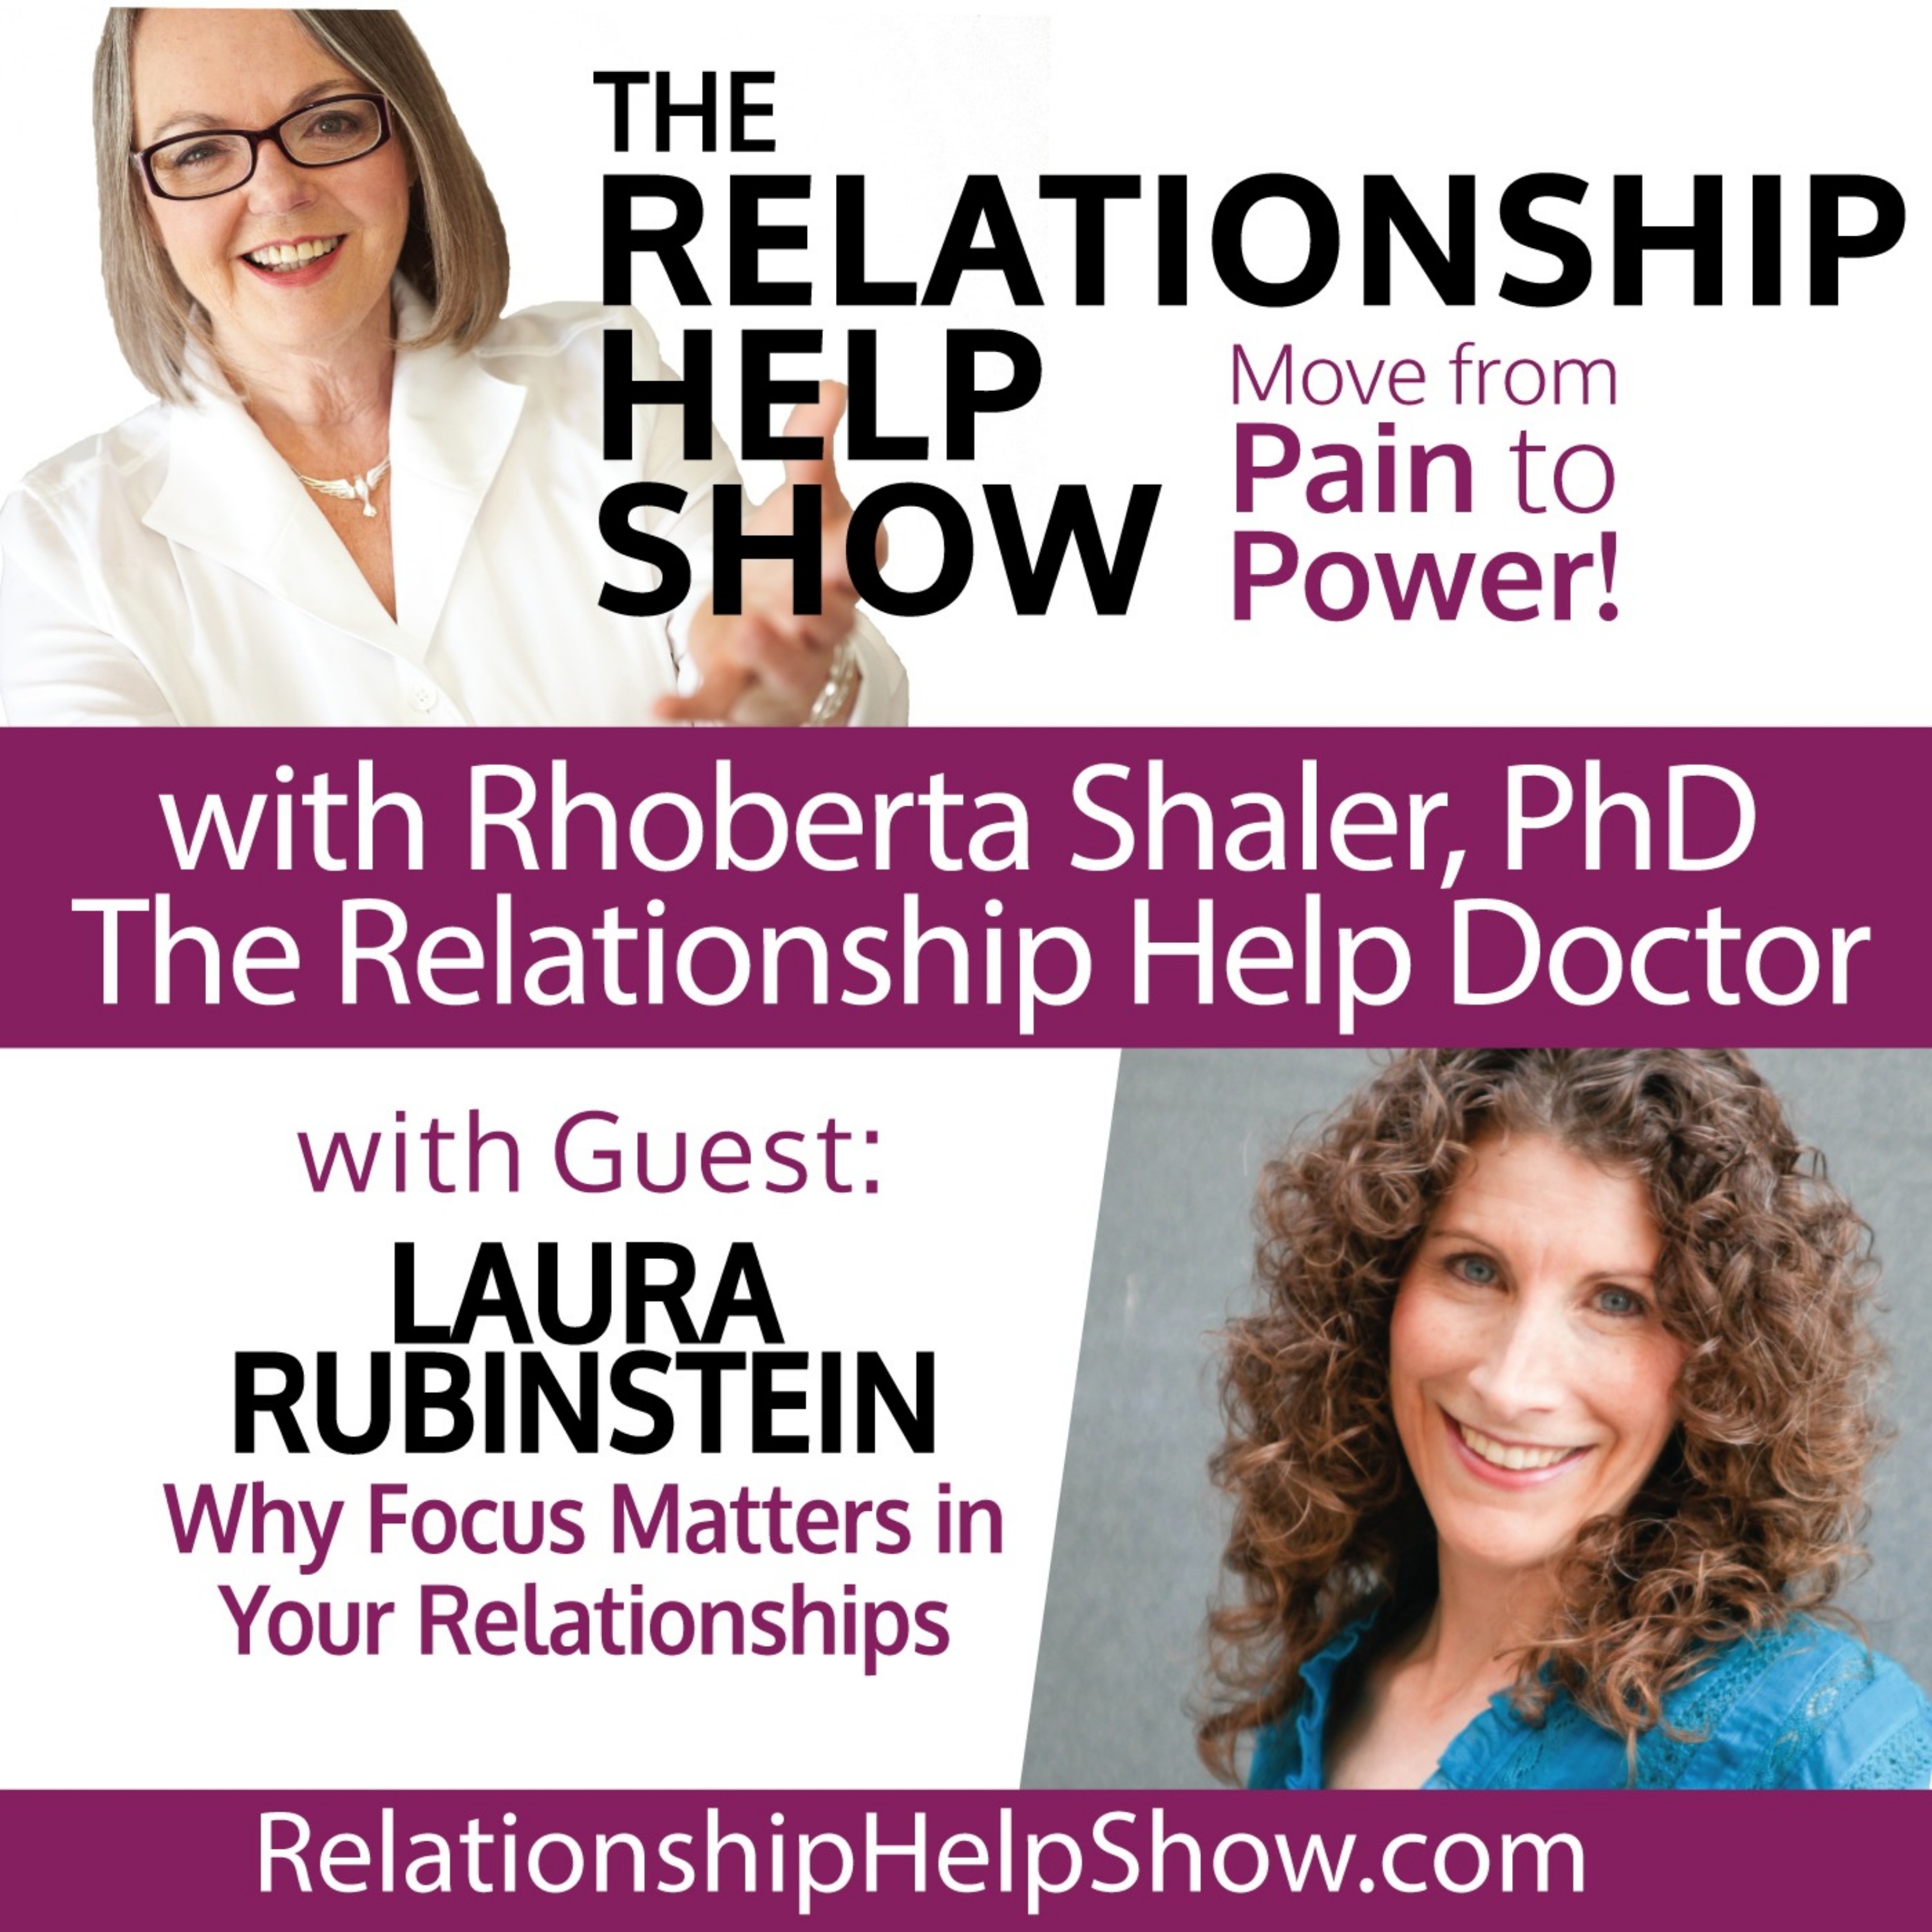 Why Focus Matters in Relationships  Guest: Laura Rubinstein